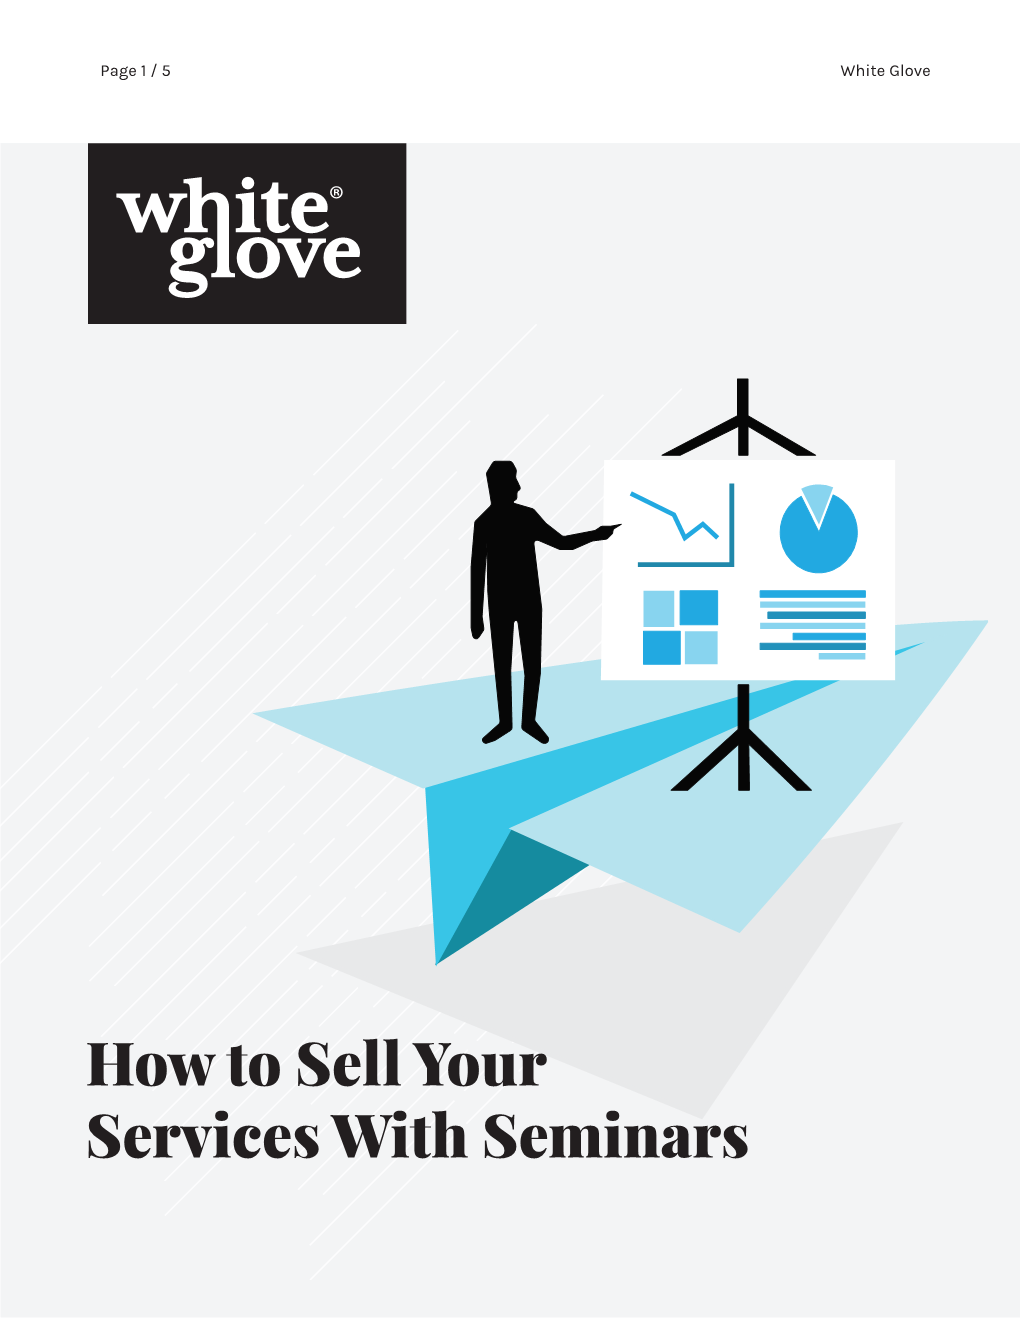 How to Sell Your Services with Seminars Page 2 / 5 White Glove